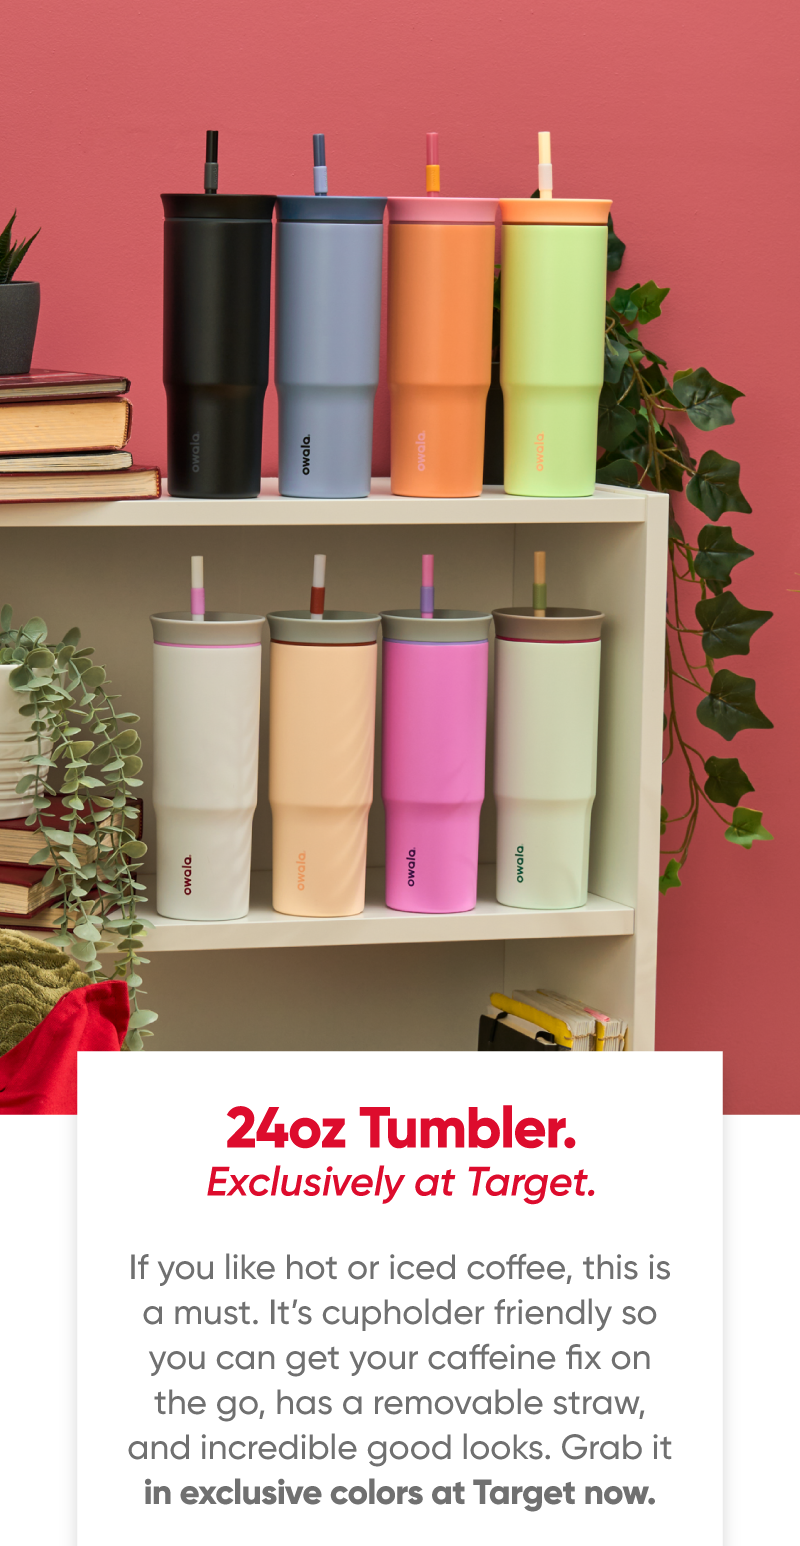 24oz Tumbler. Exclusively at Target. If you like hot or iced coffee, this is a must. It’s cupholder friendly so you can get your caffeine fix on the go, has a removable straw, and incredible good looks. Grab it in exclusive colors at Target now.